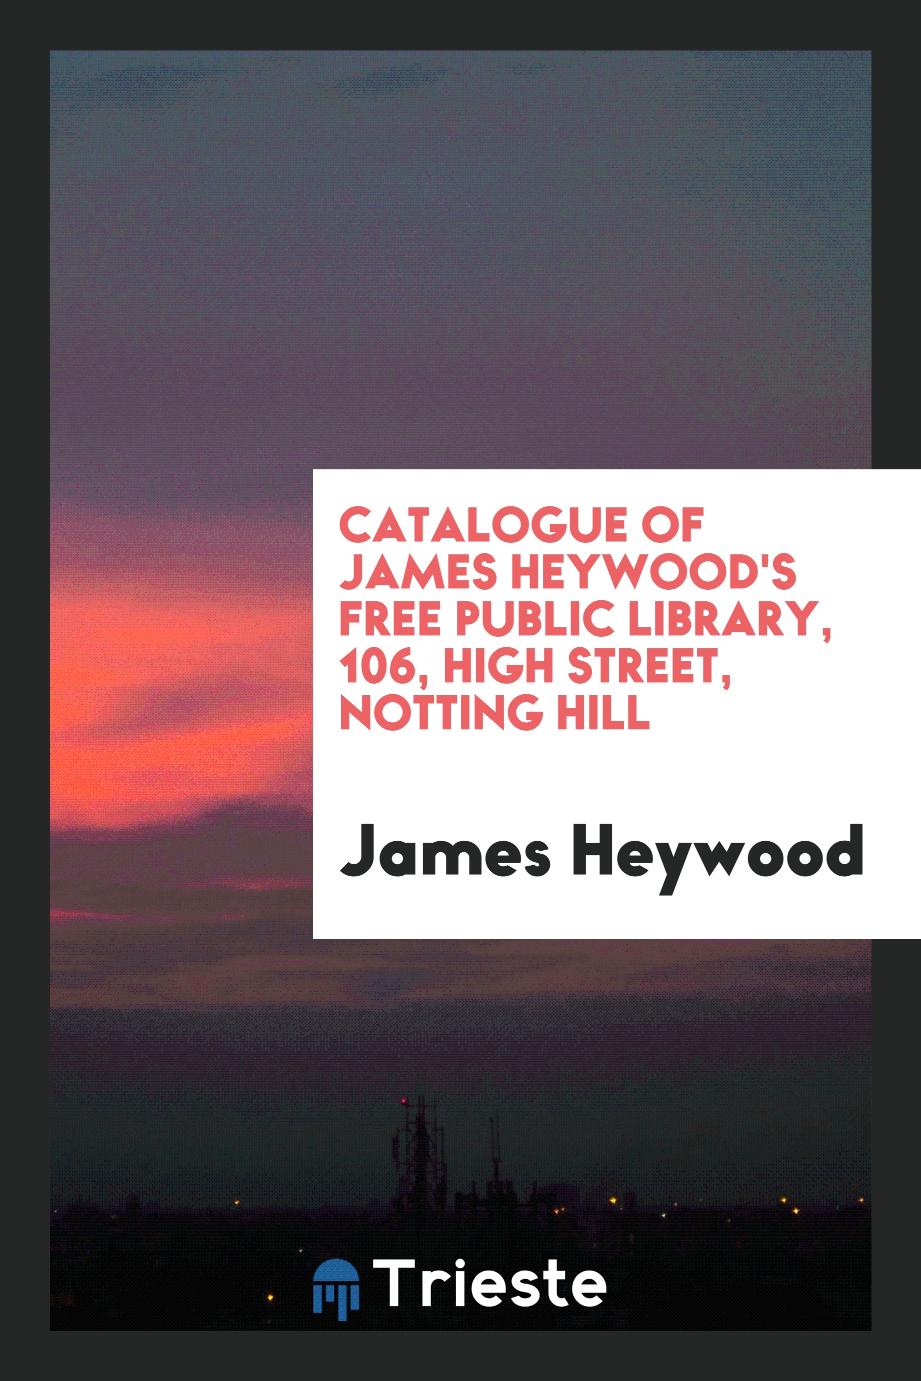 Catalogue of James Heywood's free public library, 106, High Street, Notting Hill